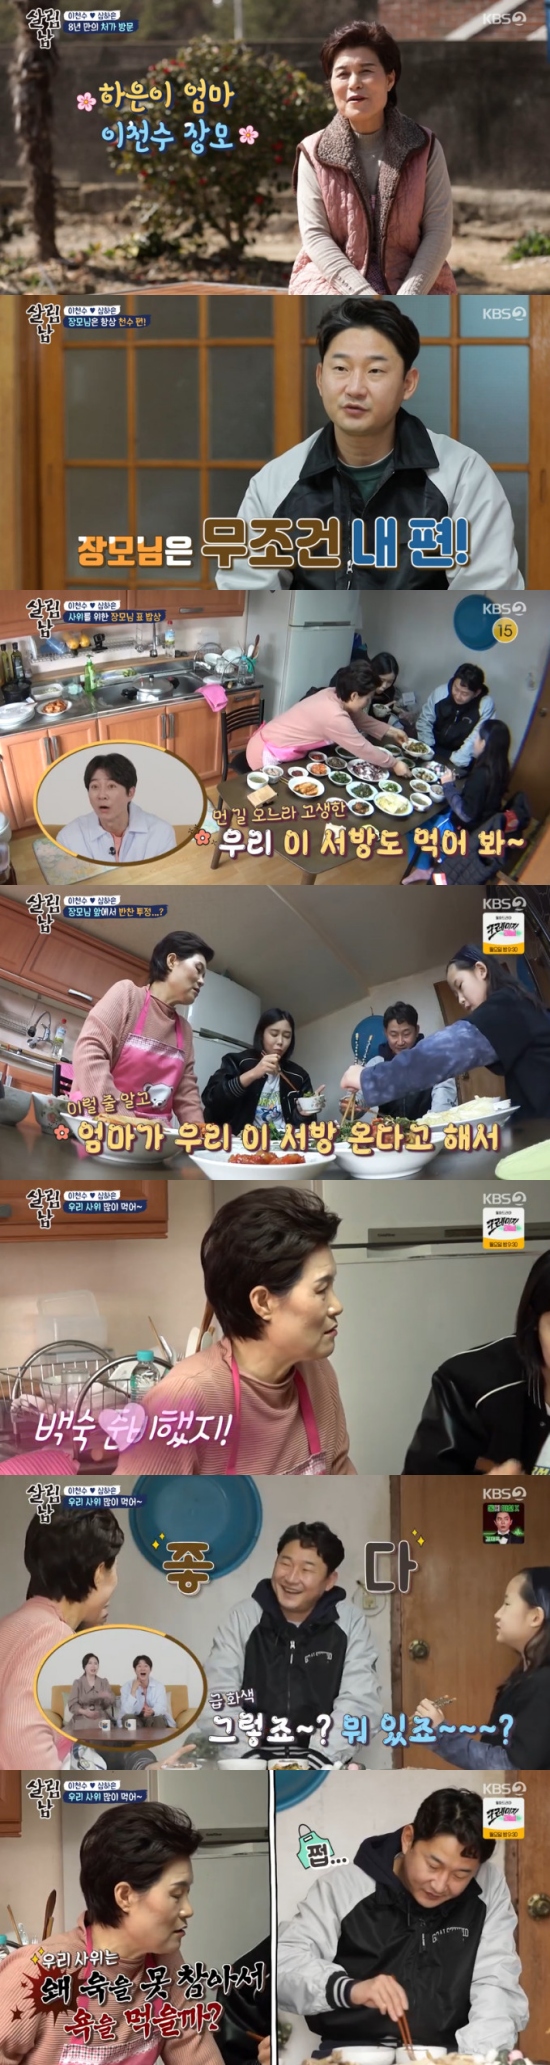 Former footballer Lee Chun-soo visited model Shim HAEUNs home town.On the 19th KBS 2TV Saving Men Season 2, Lee Chun-soo visited Shim HAEUNs Your Home home.Lee Chun-soo, Shim HAEUN and Lee Ju-eun drove somewhere on the day, and Shim HAEUN said, In spring, rural areas need work.I have been going to your home house in Goheung for a long time. Shim HAEUN recalled his childhood, saying, My mother grew up in my grandmothers house as soon as she was born. Lee Chun-soo said, HAEUN is coming to the country.I have developed a lot of mothers. I meet Father. I do not have anyone like Father to come to the country for my mother. Shim HAEUN said, It will come in eight years. Lee Chun-soo said, I have to drive together.I got better because I got better at the road, and even if I left early at dawn, I arrived at night. It took 12 hours, Shim HAEUN said.Shim HAEUN said, Father has a battery training when he is an athlete, so my mother is far from driving alone. Lee Chun-soo said, I regret that I did not go home for a long time.Take the twins, too, and the twins should show the countryside. Lee Ju-eun said, Then Father should help. Shim HAEUNs mother was also welcomed, and Lee Chun-soo said, I can see it as my side.When I fight HAEUN from the time of dating, HAEUN calls my father and sees Lee Chun-soo is not good. I call my mother-in-law and say, Why is HAEUN?I do not like it. He sided with each other. So my mother-in-law is on my side. Shim HAEUNs mother set up a table, and Lee Chun-soo was disappointed when she did not have a high-quality dinner.Lee Chun-soo added, Honestly, I like meat, but I feel sorry for fish and herbs, so I think thats what came out.Shim HAEUN thanked her for saying, My mother would have been hard, and Shim HAEUN said, My mother has done it.Lee Chun-soo smiled only after being told that Baek Sook was there.Shim HAEUN mother said: I was upset by the comments.Lee Chun-soo said, HAEUN is also huge.Shim HAEUN mother said: HAEUN was not going to get a bump.Its because Im so patient, Lee Chun-soo said, I called our Father and called him hard because of me.Shim HAEUNs mother nailed it, saying, How hard is it to call Father? and Lee Chun-soo said, I dont have my side; I have my mother.I was sad that my mother did not take my side. Mom HAEUN told Lee Ju-eun, Do not live with what you want to say to you.Not only that, but Shim HAEUNs mother called the villagers to hold a fan meeting for Lee Chun-soo, and went to a store with Lee Chun-soo.Lee Chun-soo had to follow her mother, Shim HAEUN, to sign autographs.Photo = KBS Broadcasting Screen